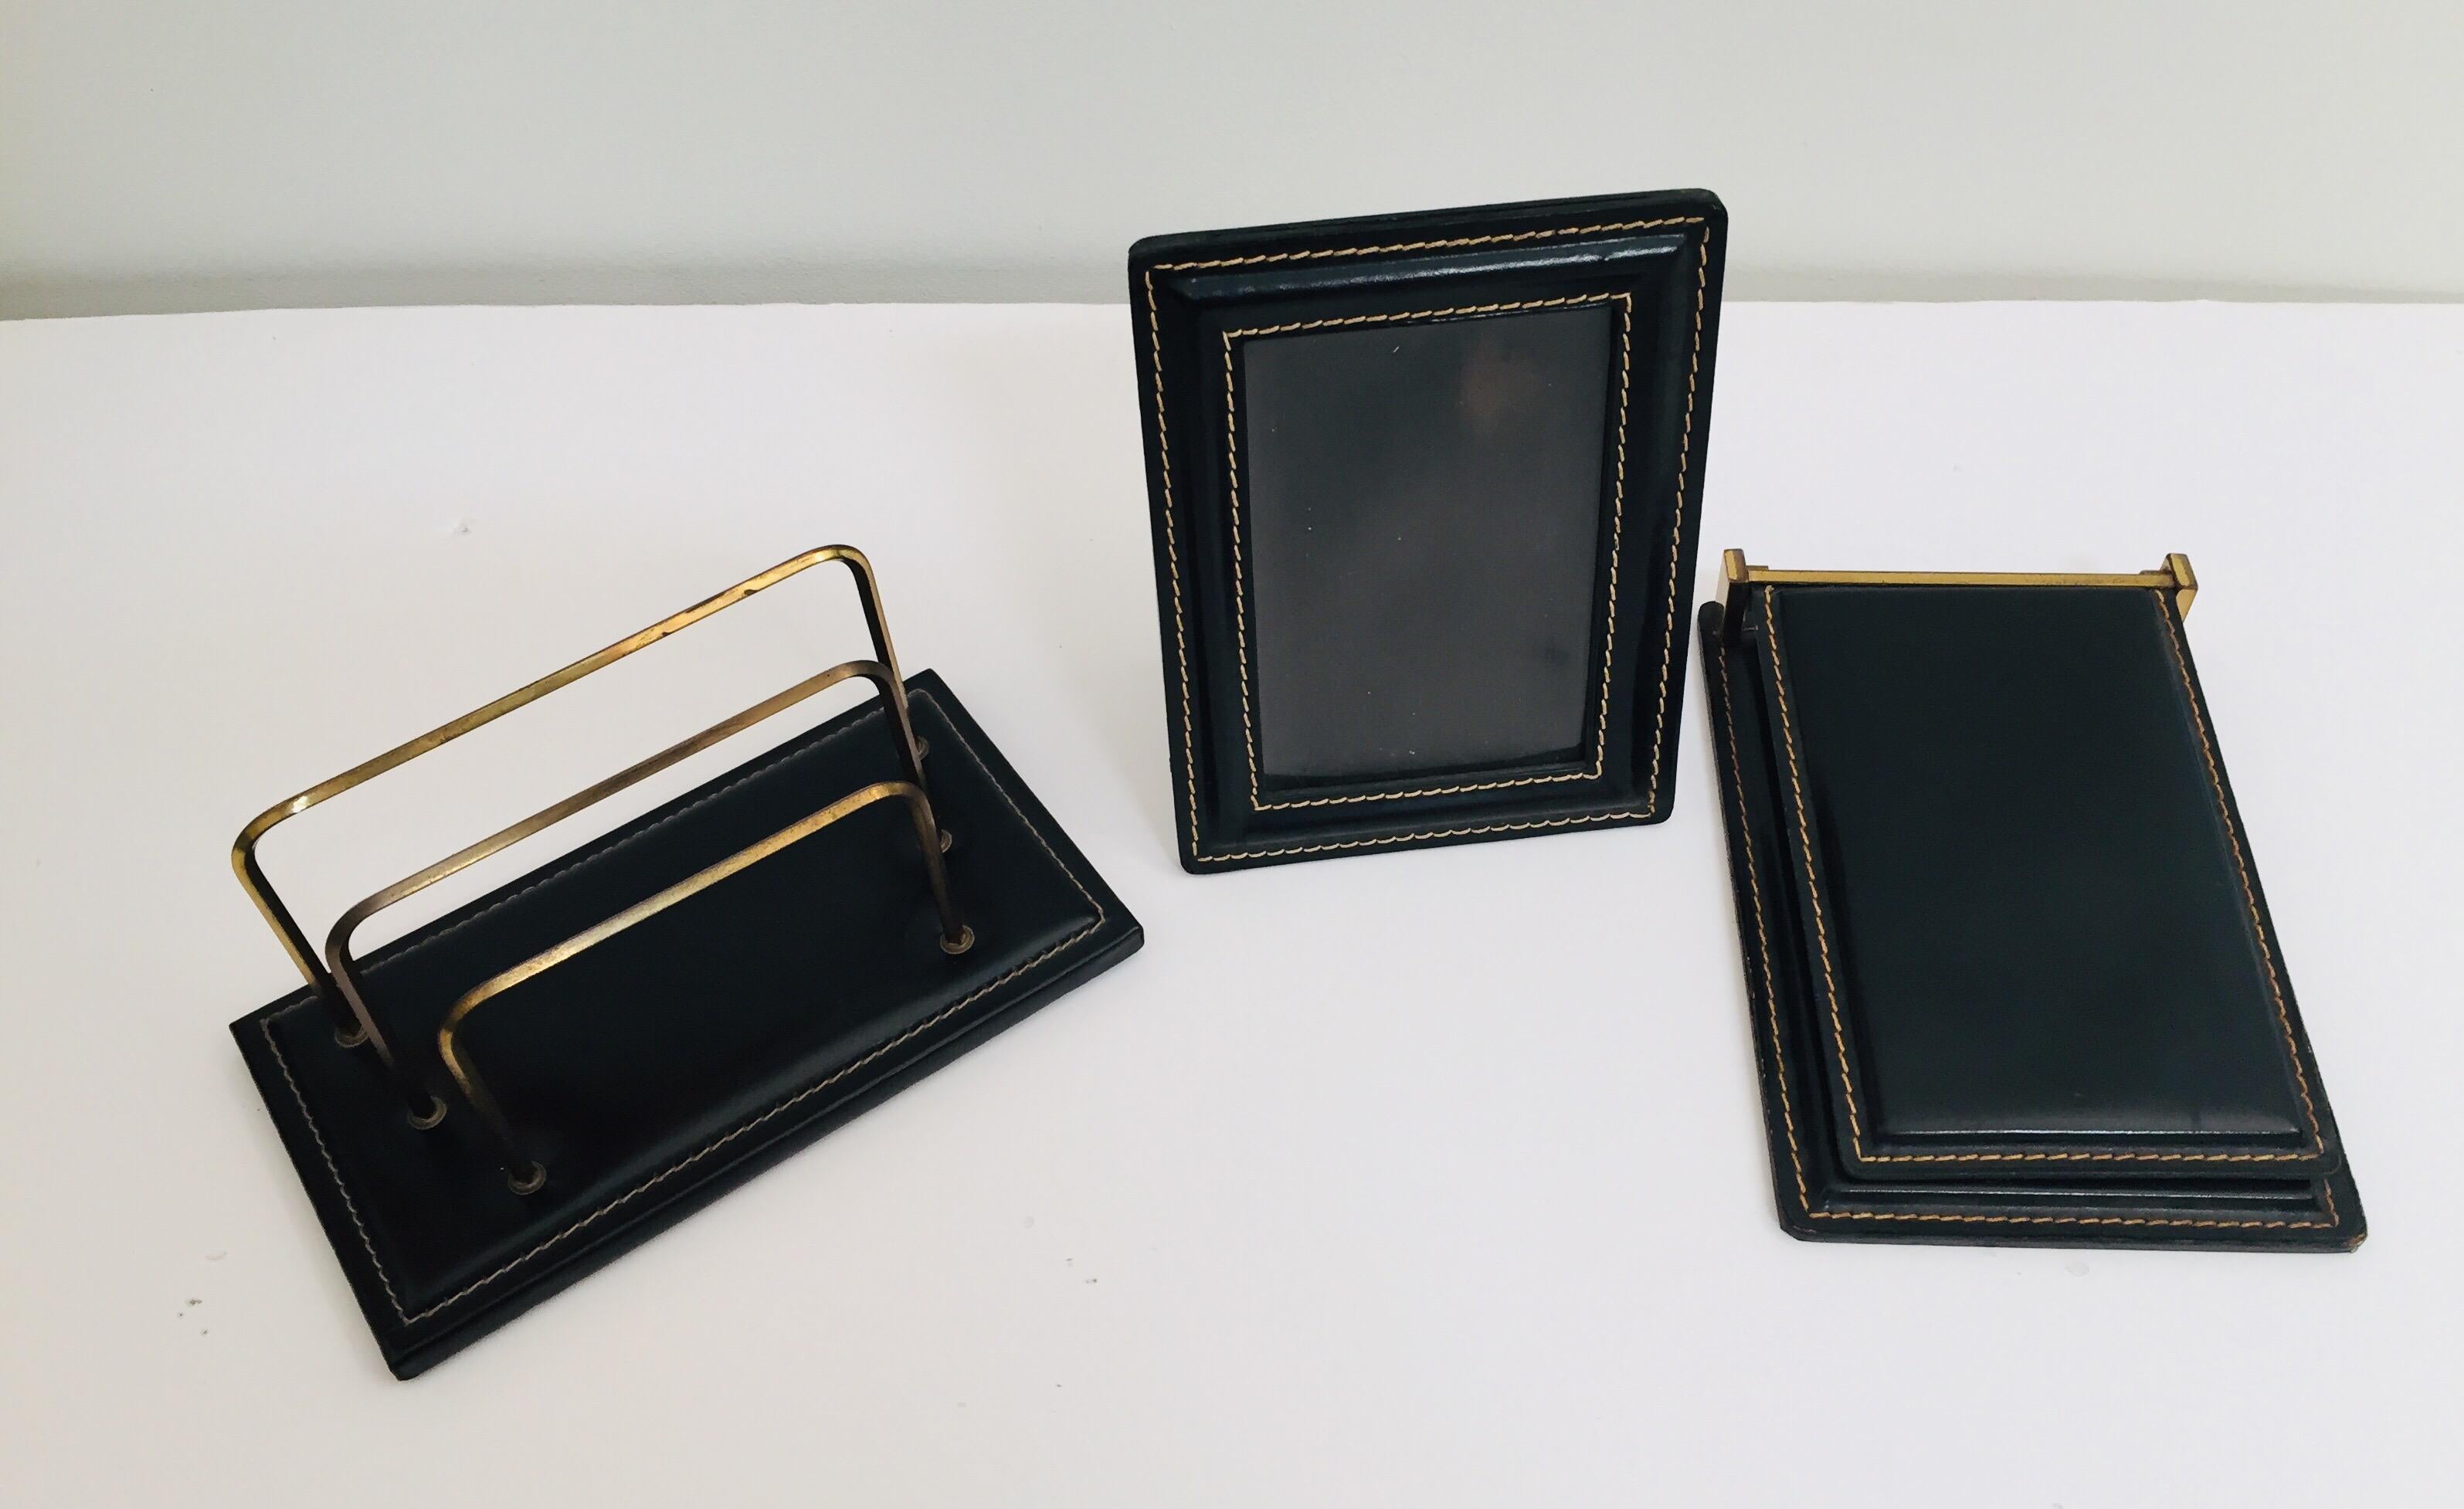 Adnet Art Deco style desk set comprising of a black leather and brass letter desk holder, rack, picture frame and a leather note pad with original paper refill and leather photo frame.
The leather with contrast saddle stitching is handcrafted and